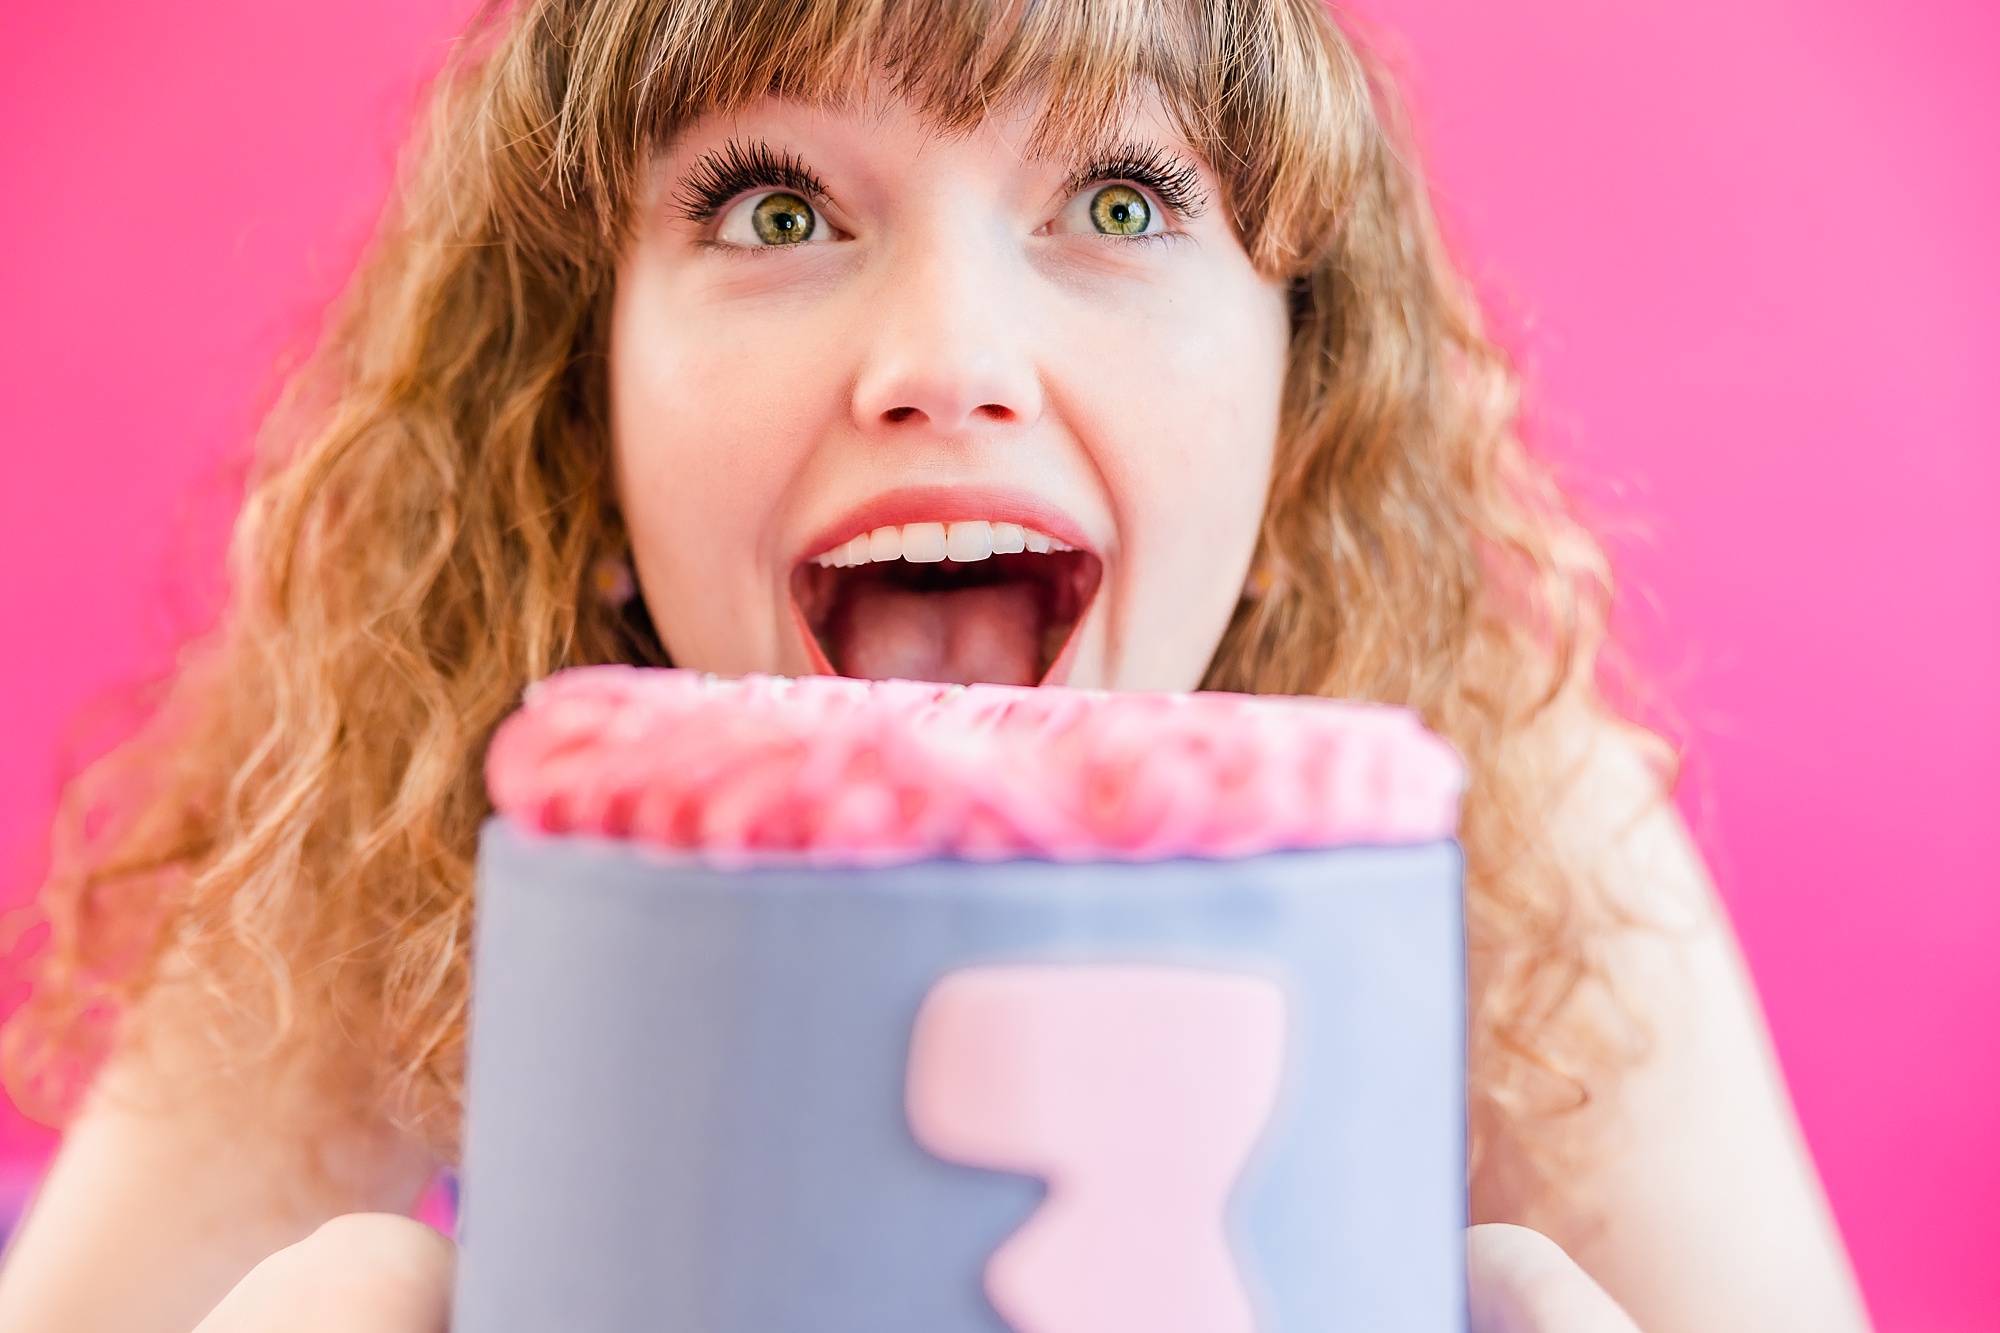 woman laughs about to bite cake during nplayful branding portraits